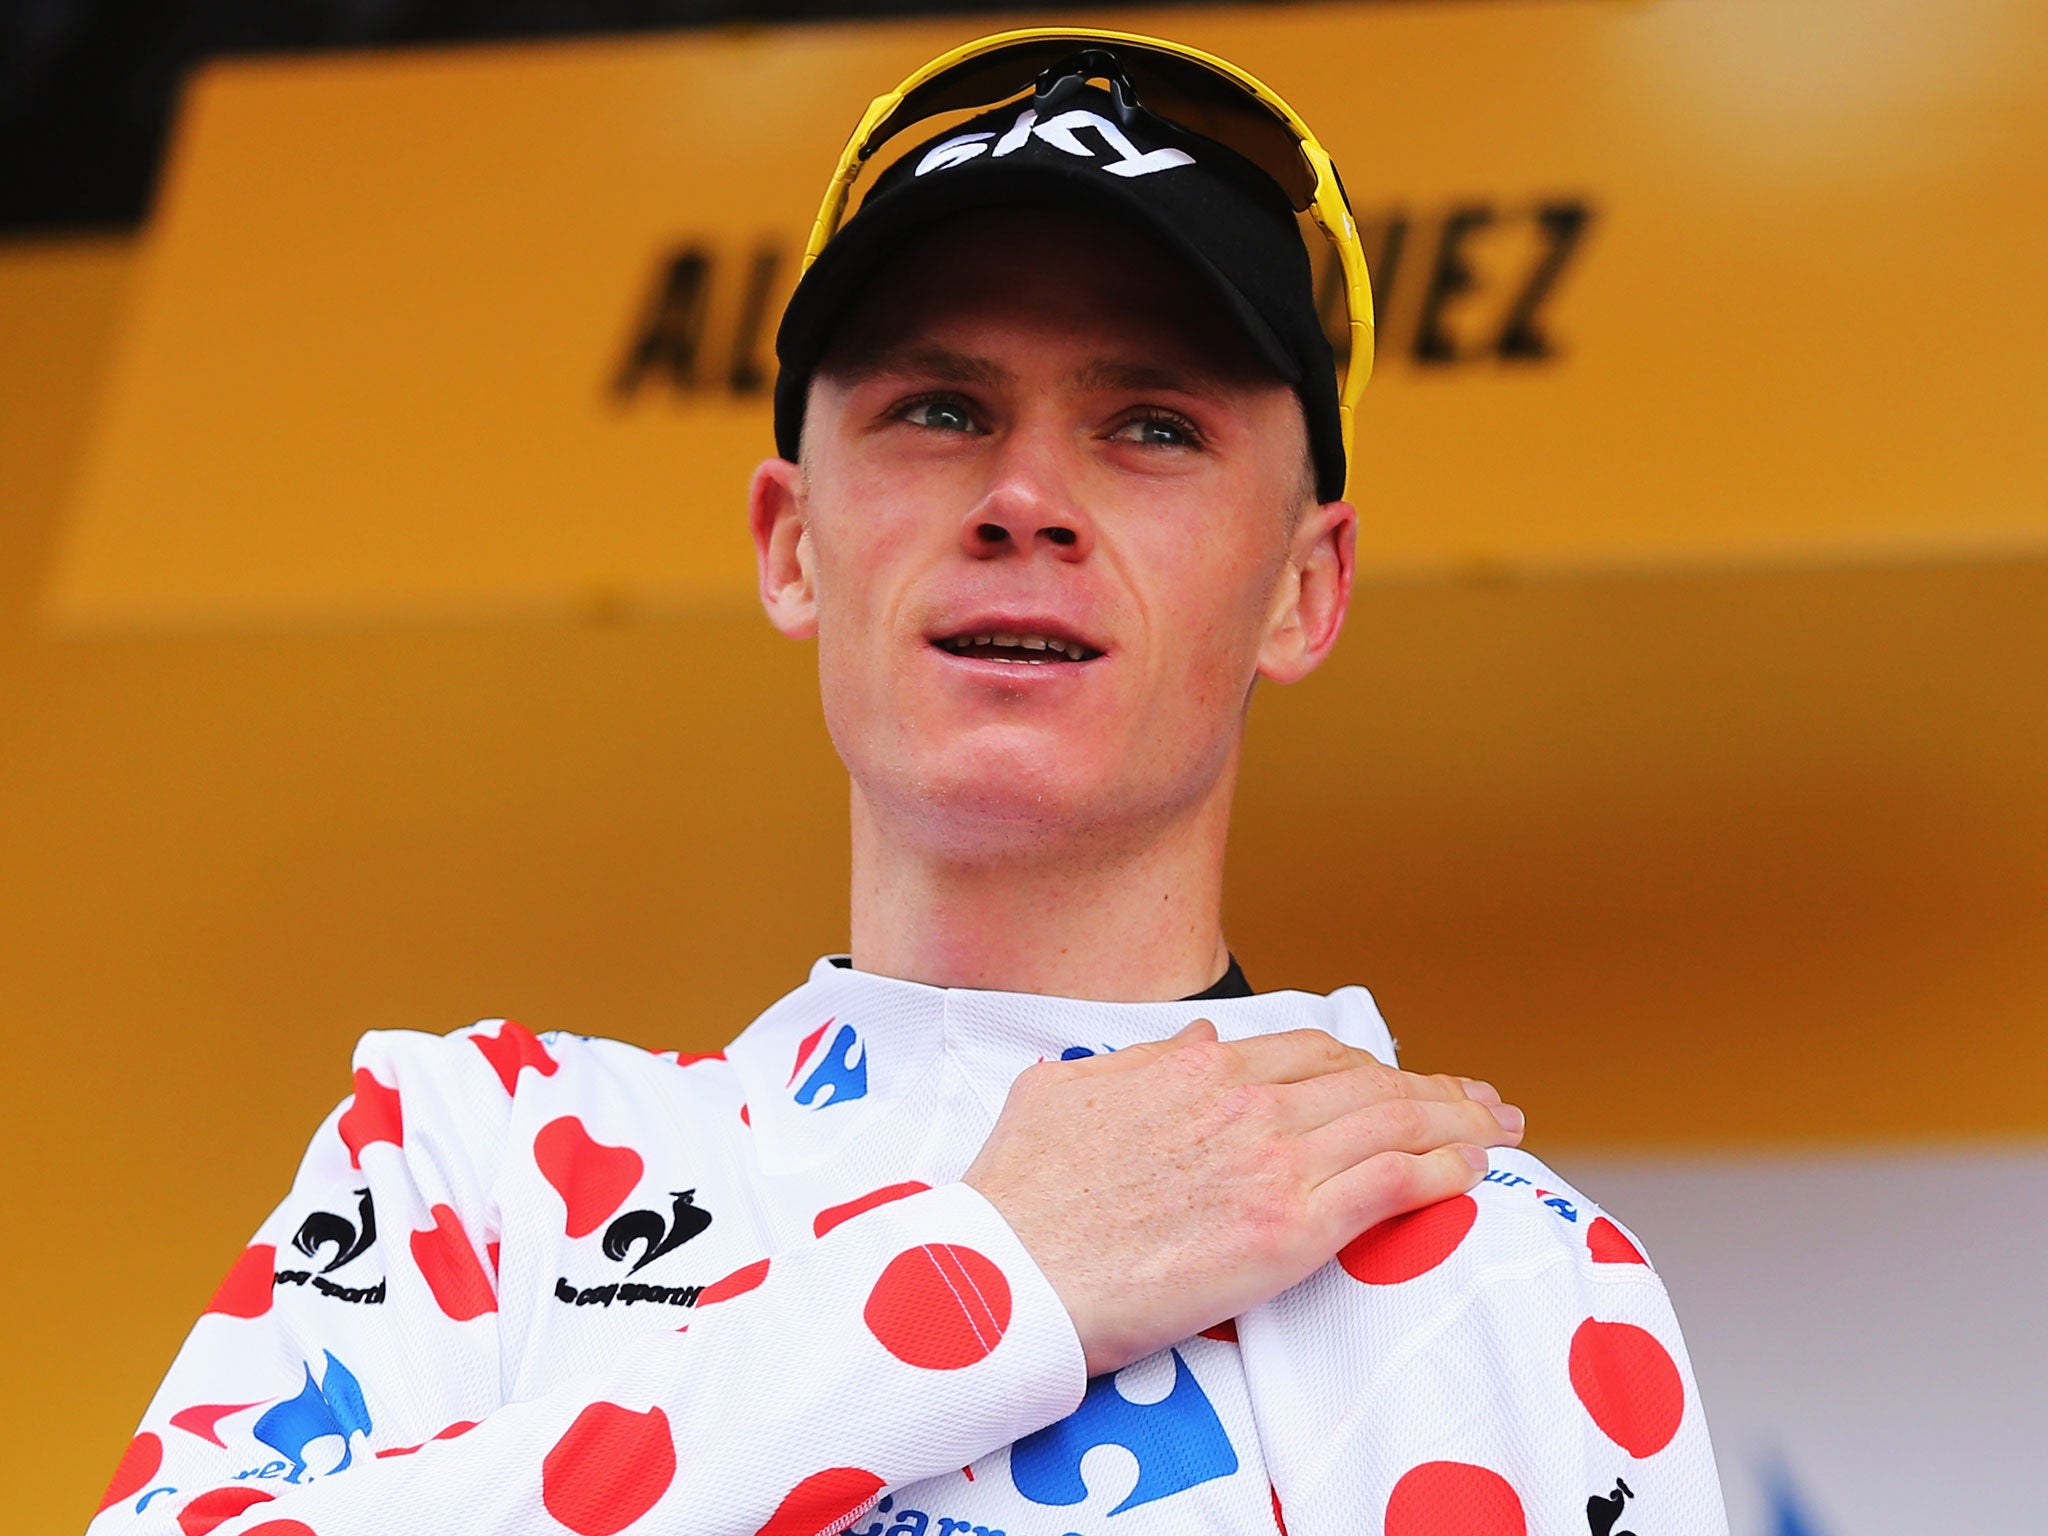 Chris Froome in his baseball cap